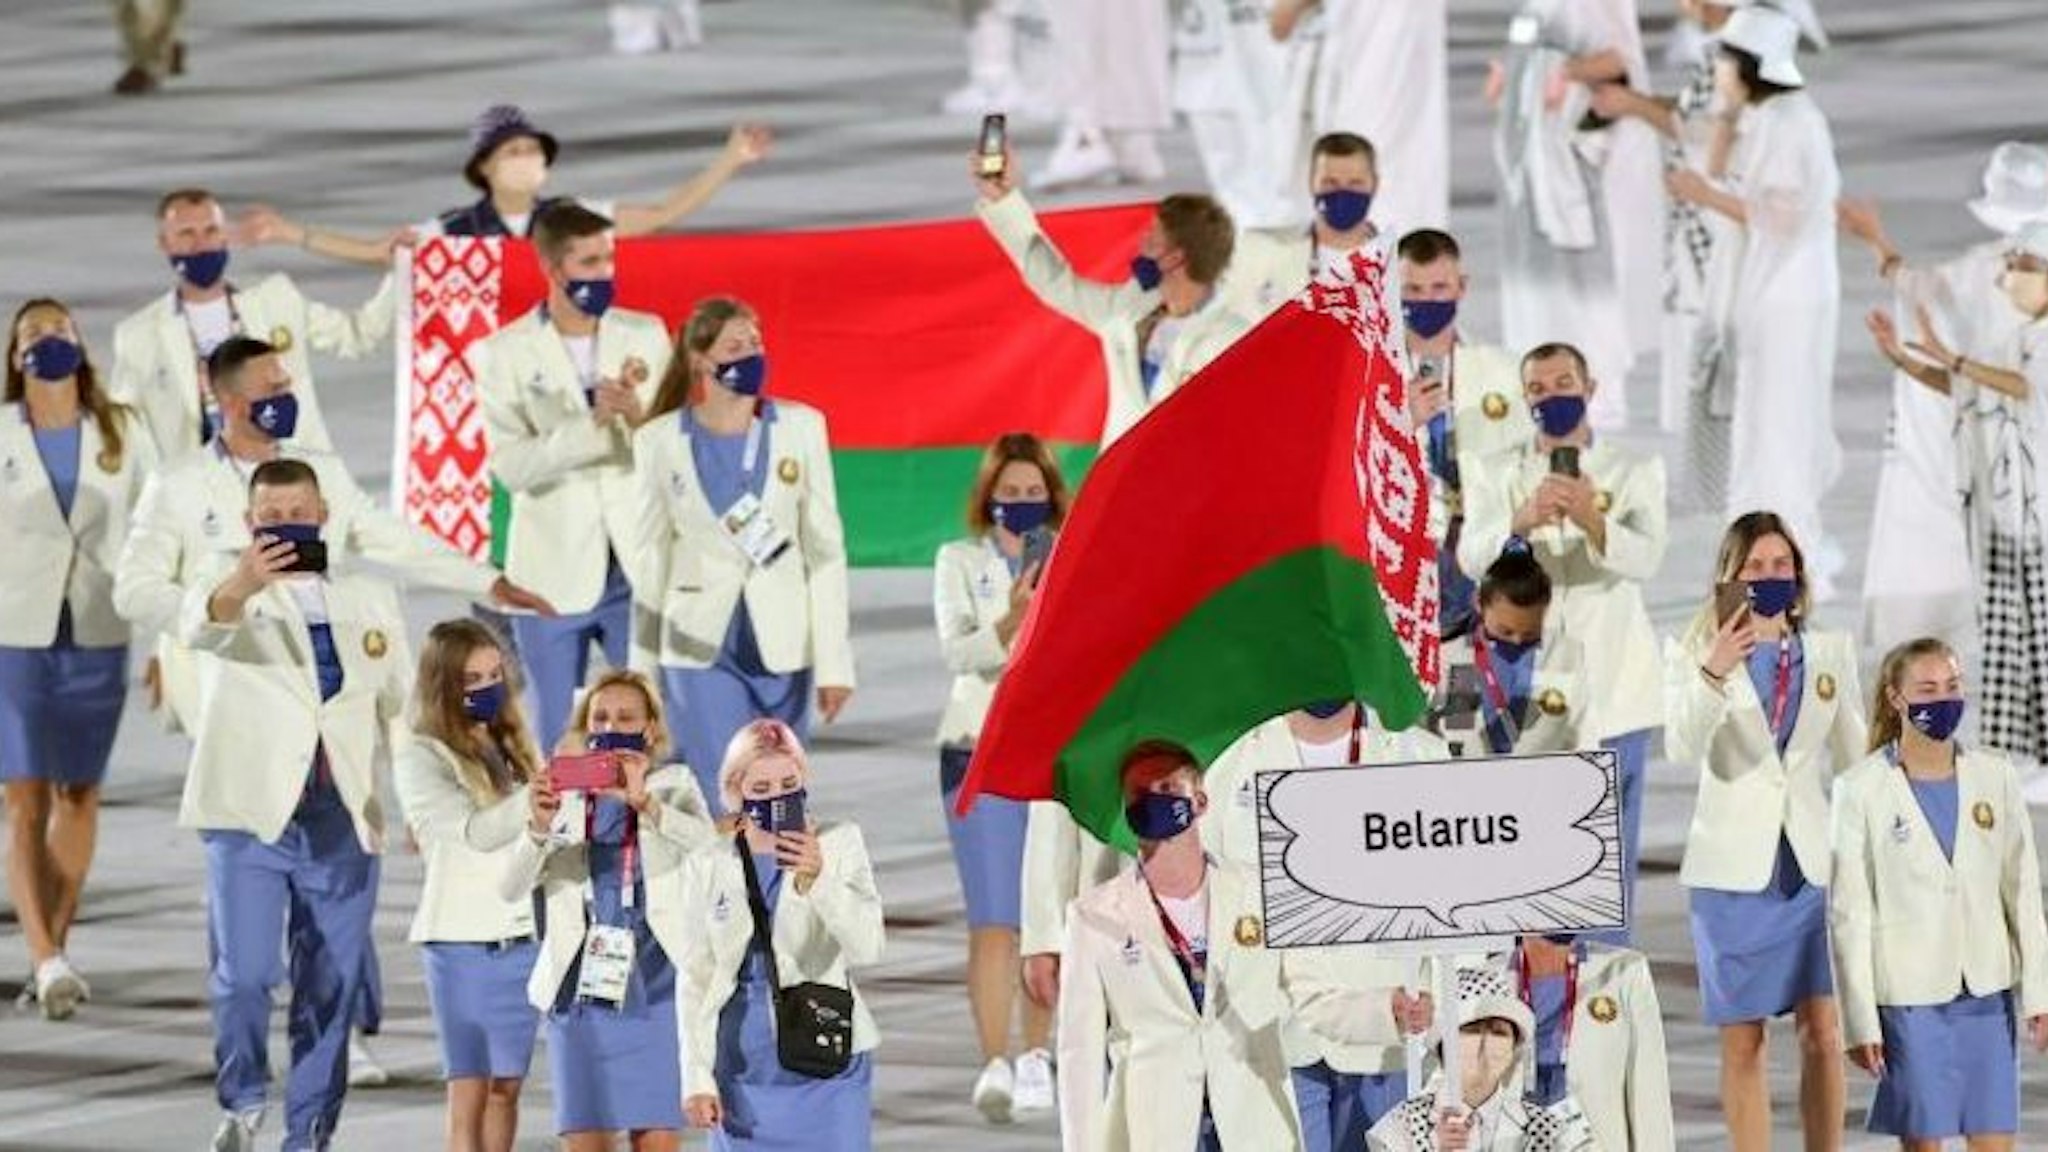 Olympic delegation of Belarus parade into the Olympic Stadium during the opening ceremony of Tokyo 2020 Olympic Games in Tokyo, Japan, July 23, 2021.